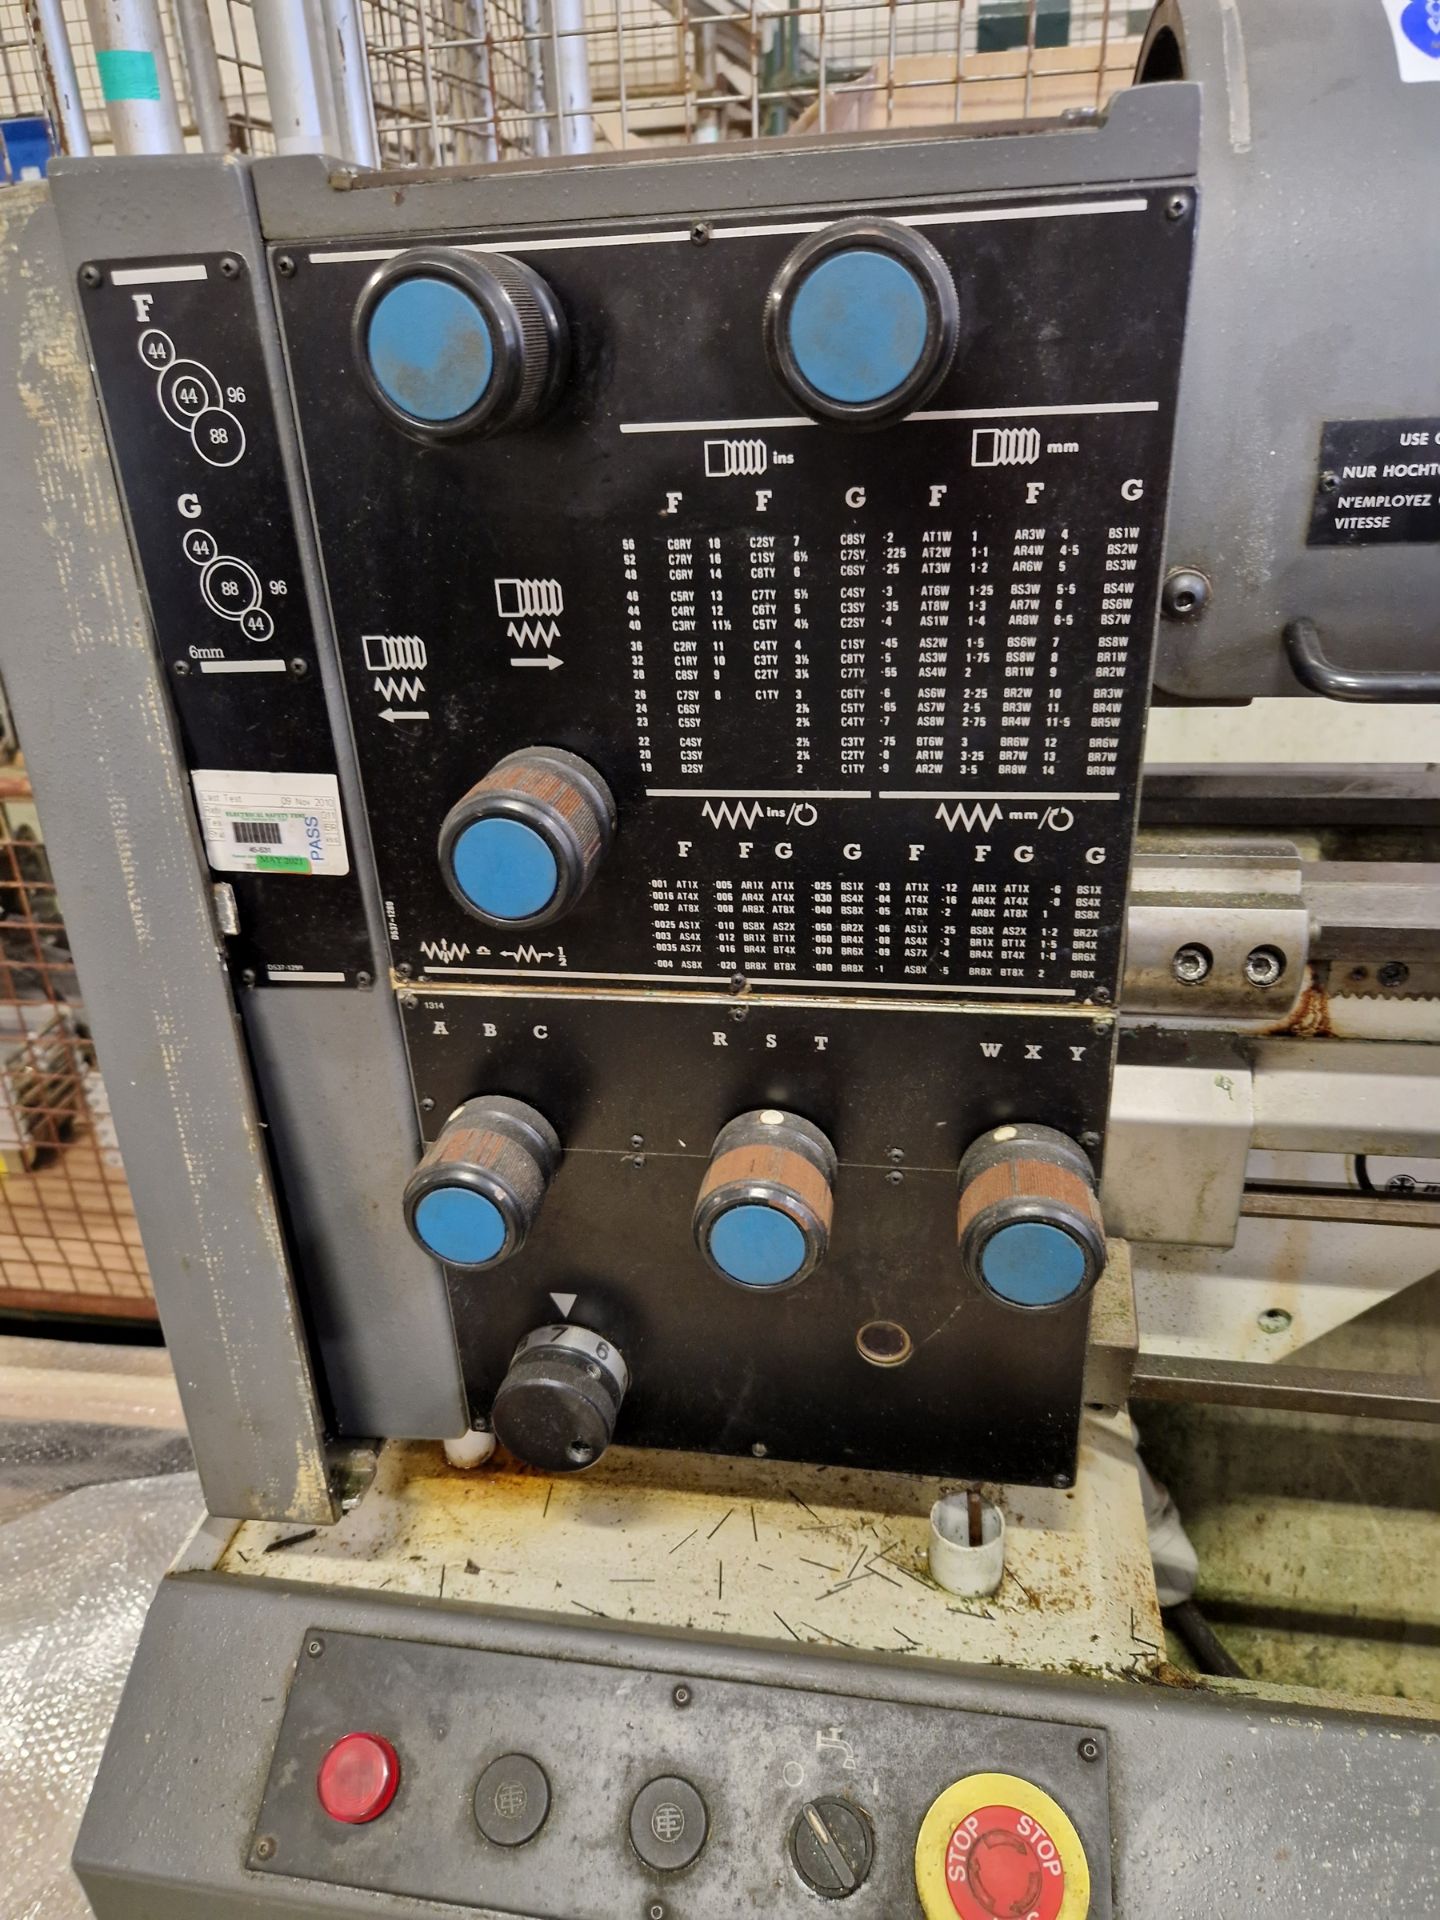 600 Lathes Colchester Student 2500 lathe - spindle 40-2500 rpm - 415V - 3 phase - Image 7 of 12